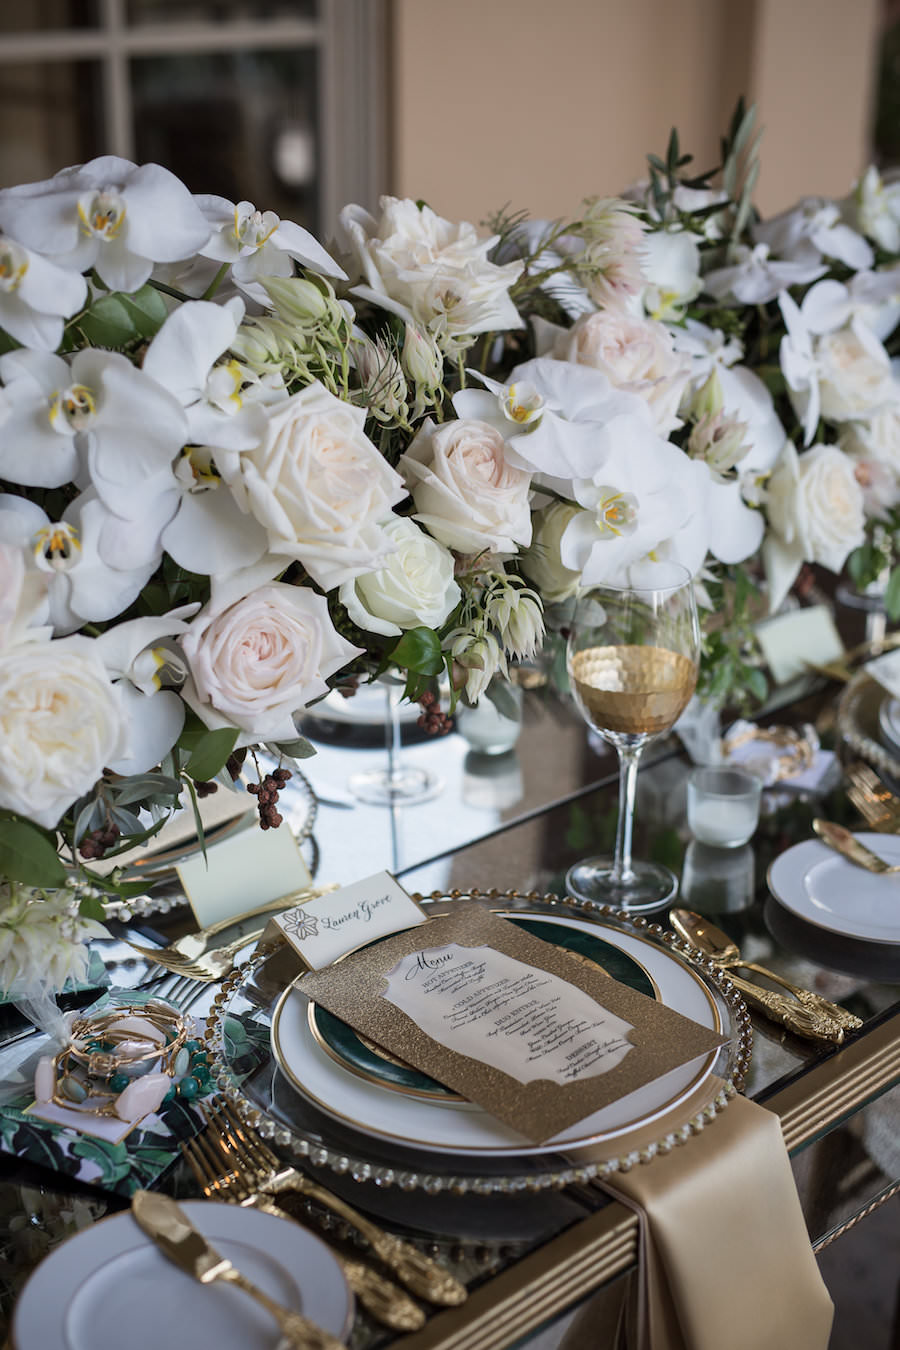 Outdoor Elegant, Sophisticated Vintage Wedding Reception Ideas & Inspiration with Gold Place Cards, China and Beaded Chargers and White Floral Centerpieces | Sarasota Wedding Planner NK Productions